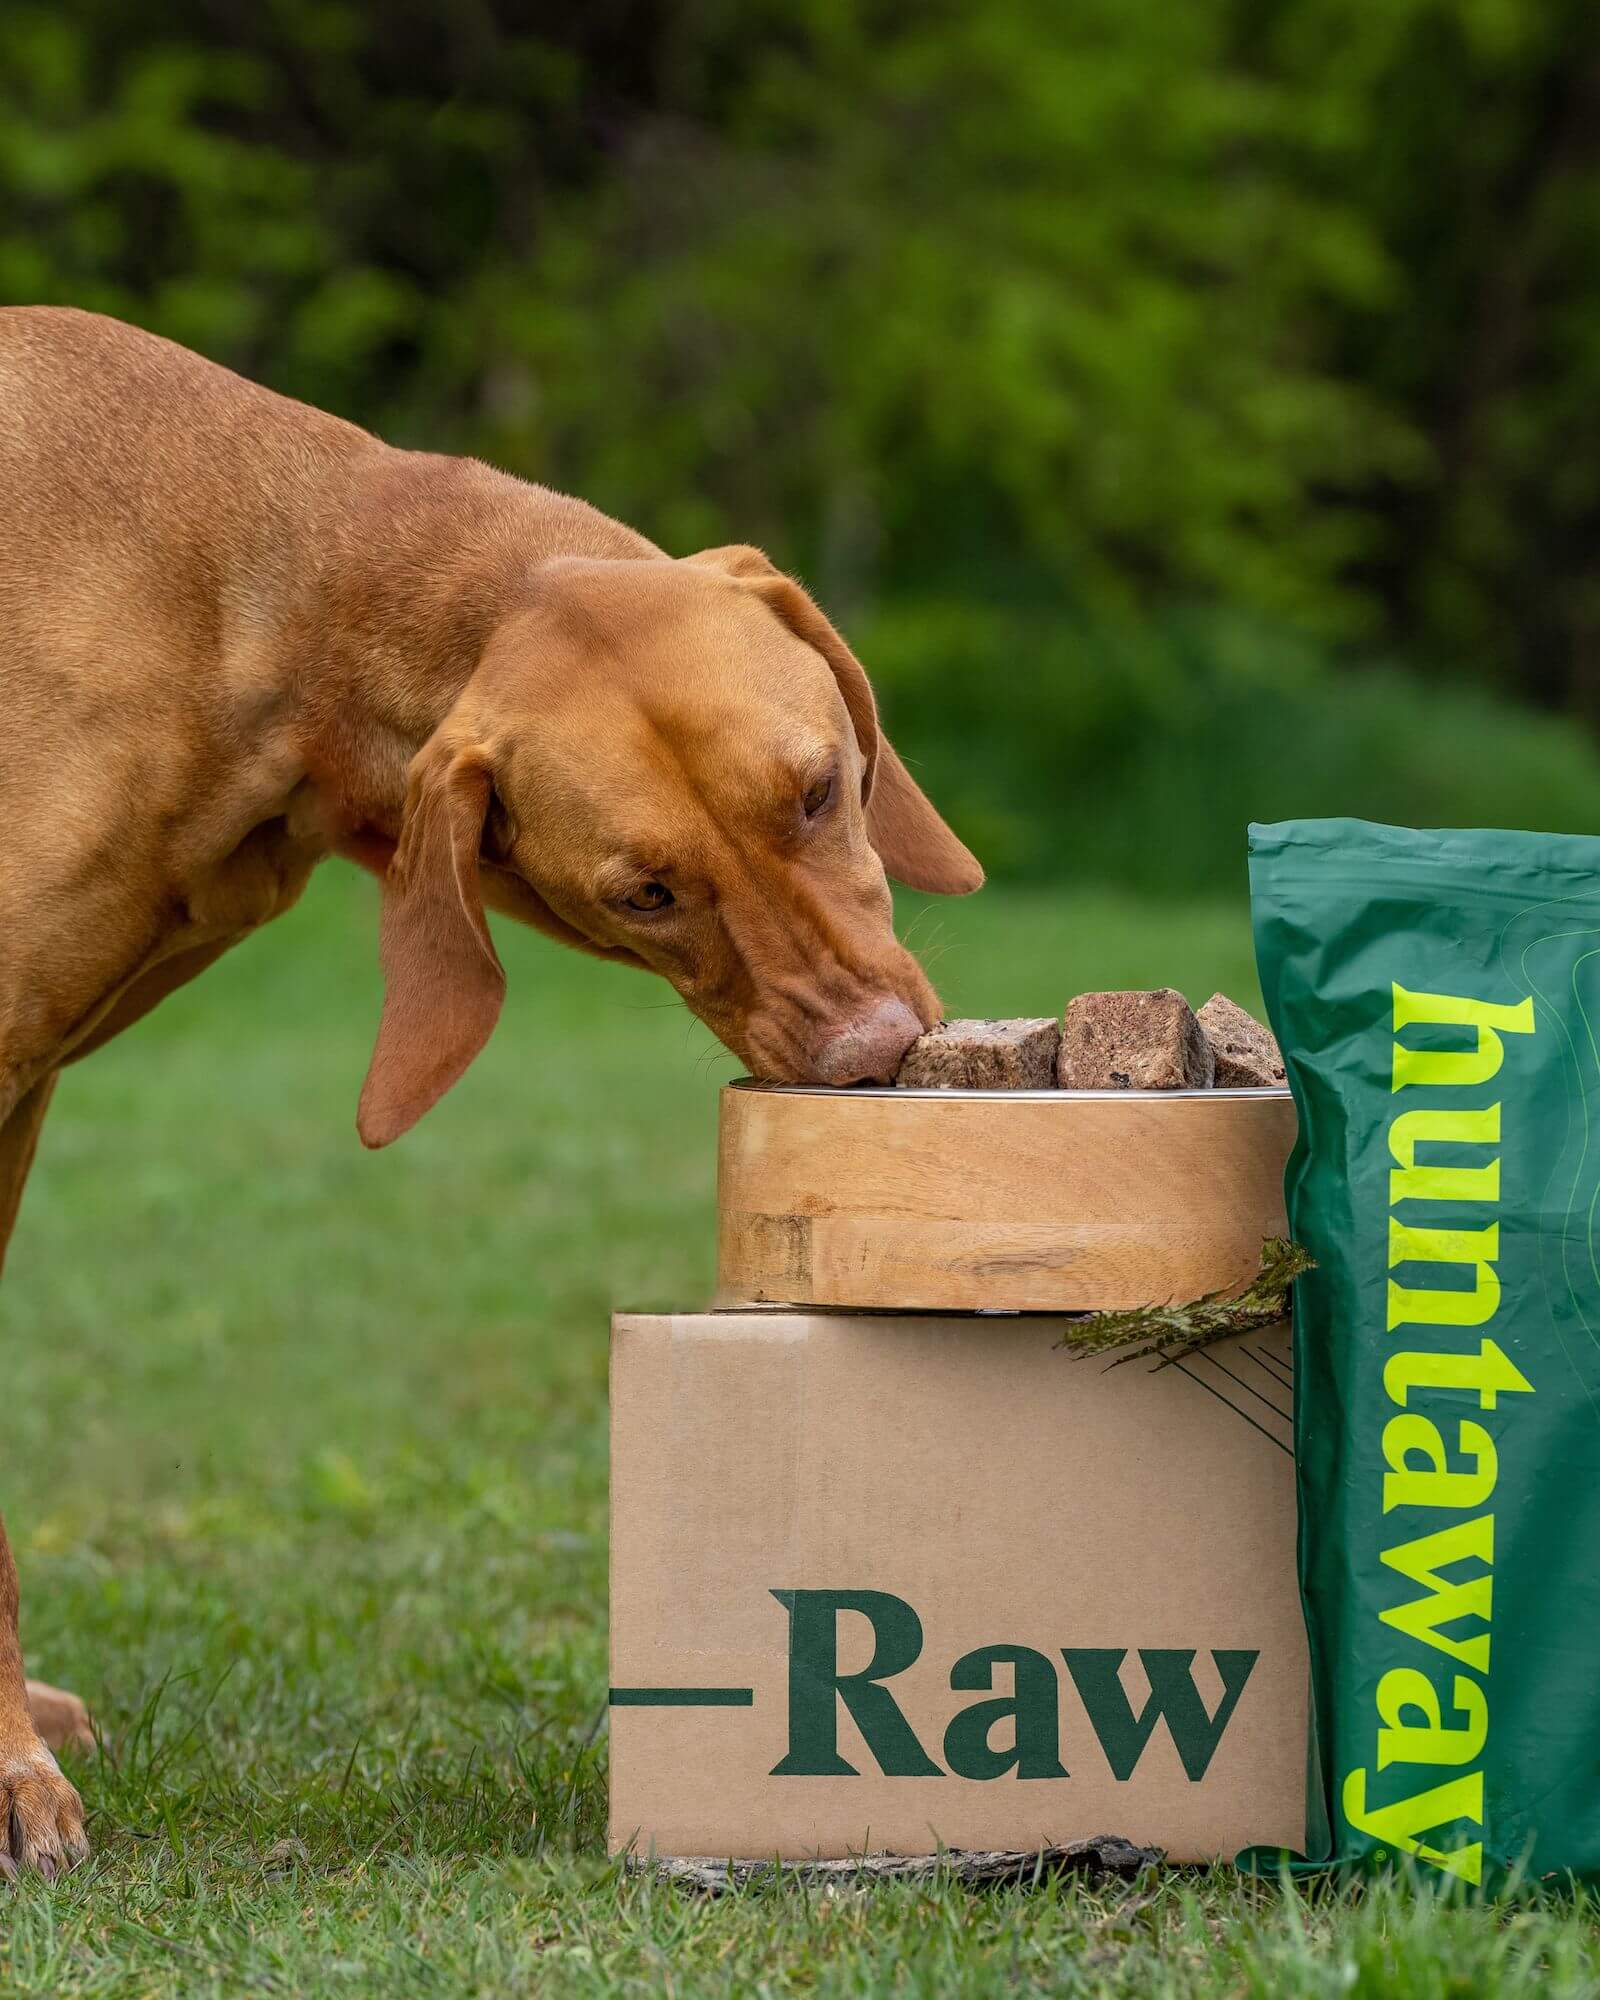 A large dog eating a cube of wild raw venison dog food which is sitting on a box of venison dog food, a bag of the raw dog food